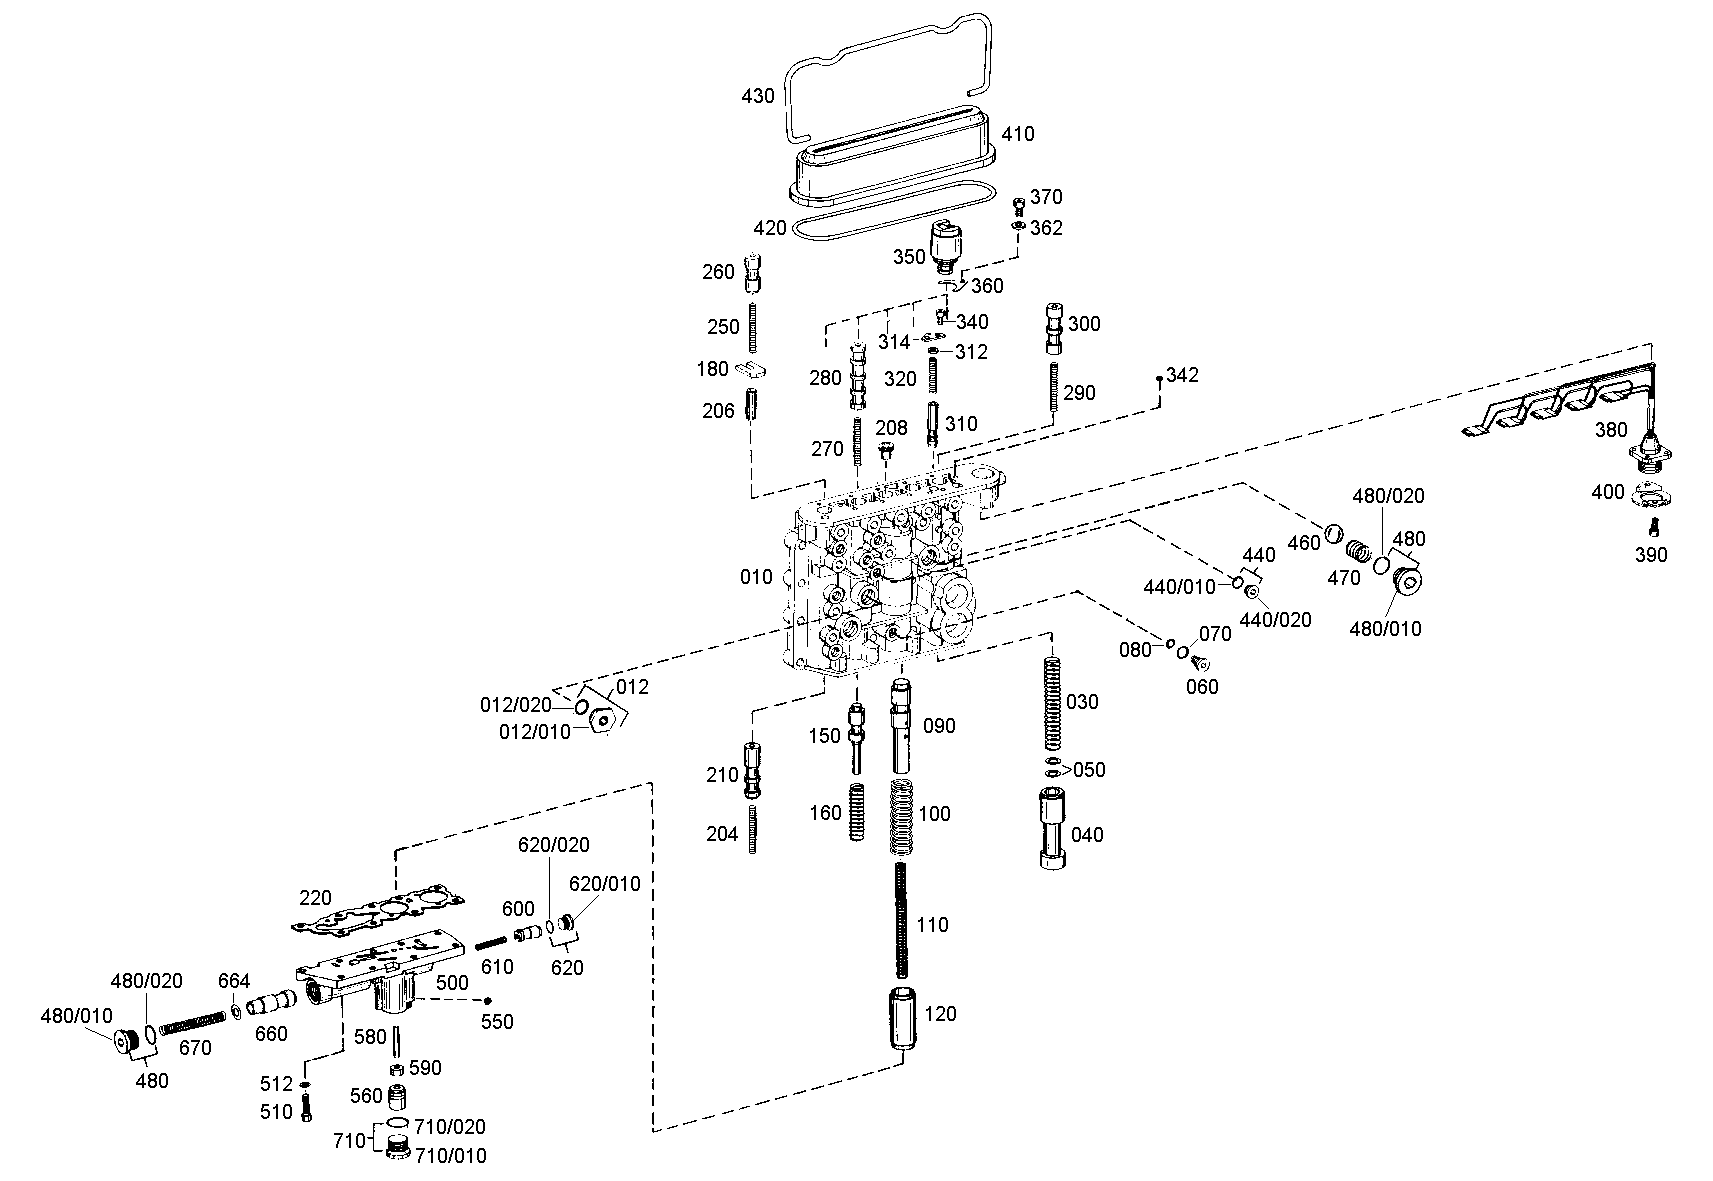 drawing for MOXY TRUCKS AS 252579 - VALVE BLOCK (figure 2)